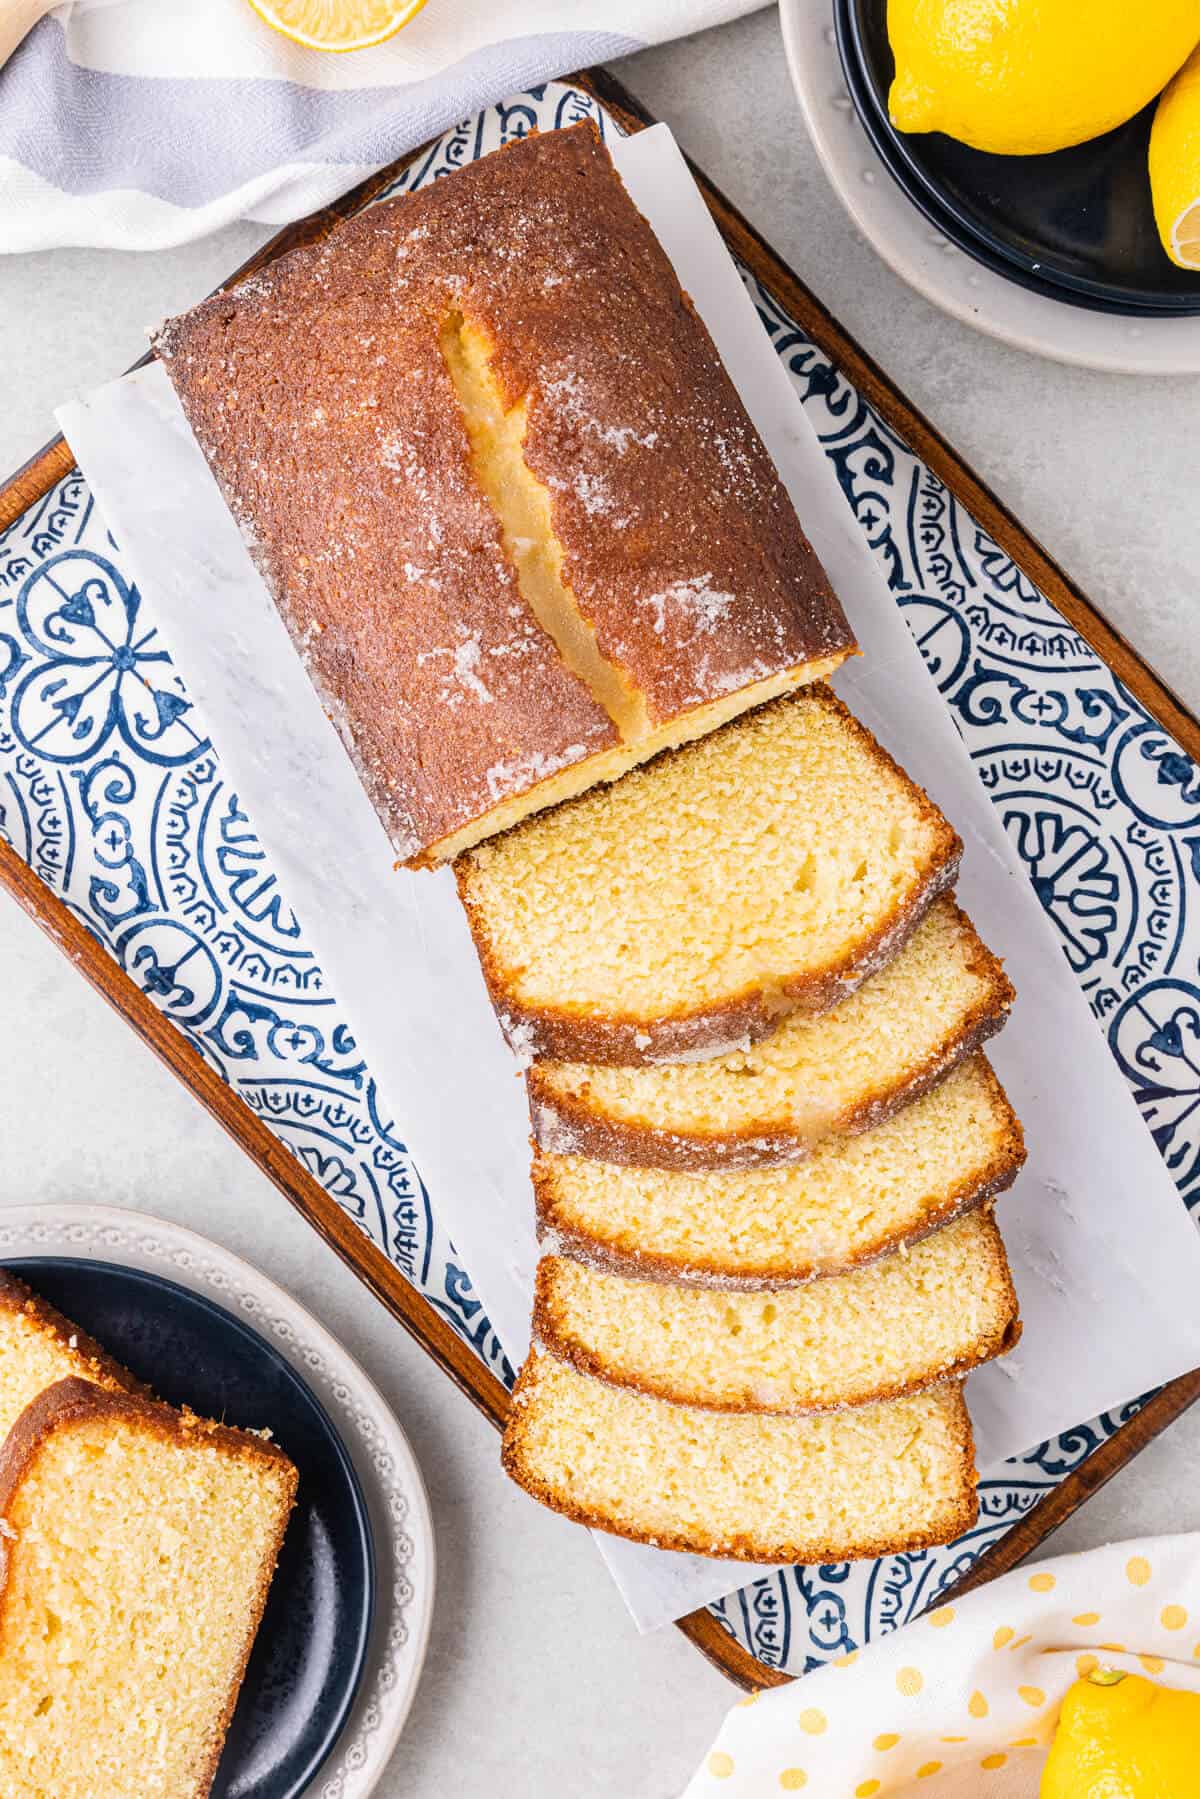 Lemon bread with slices cut off the end.